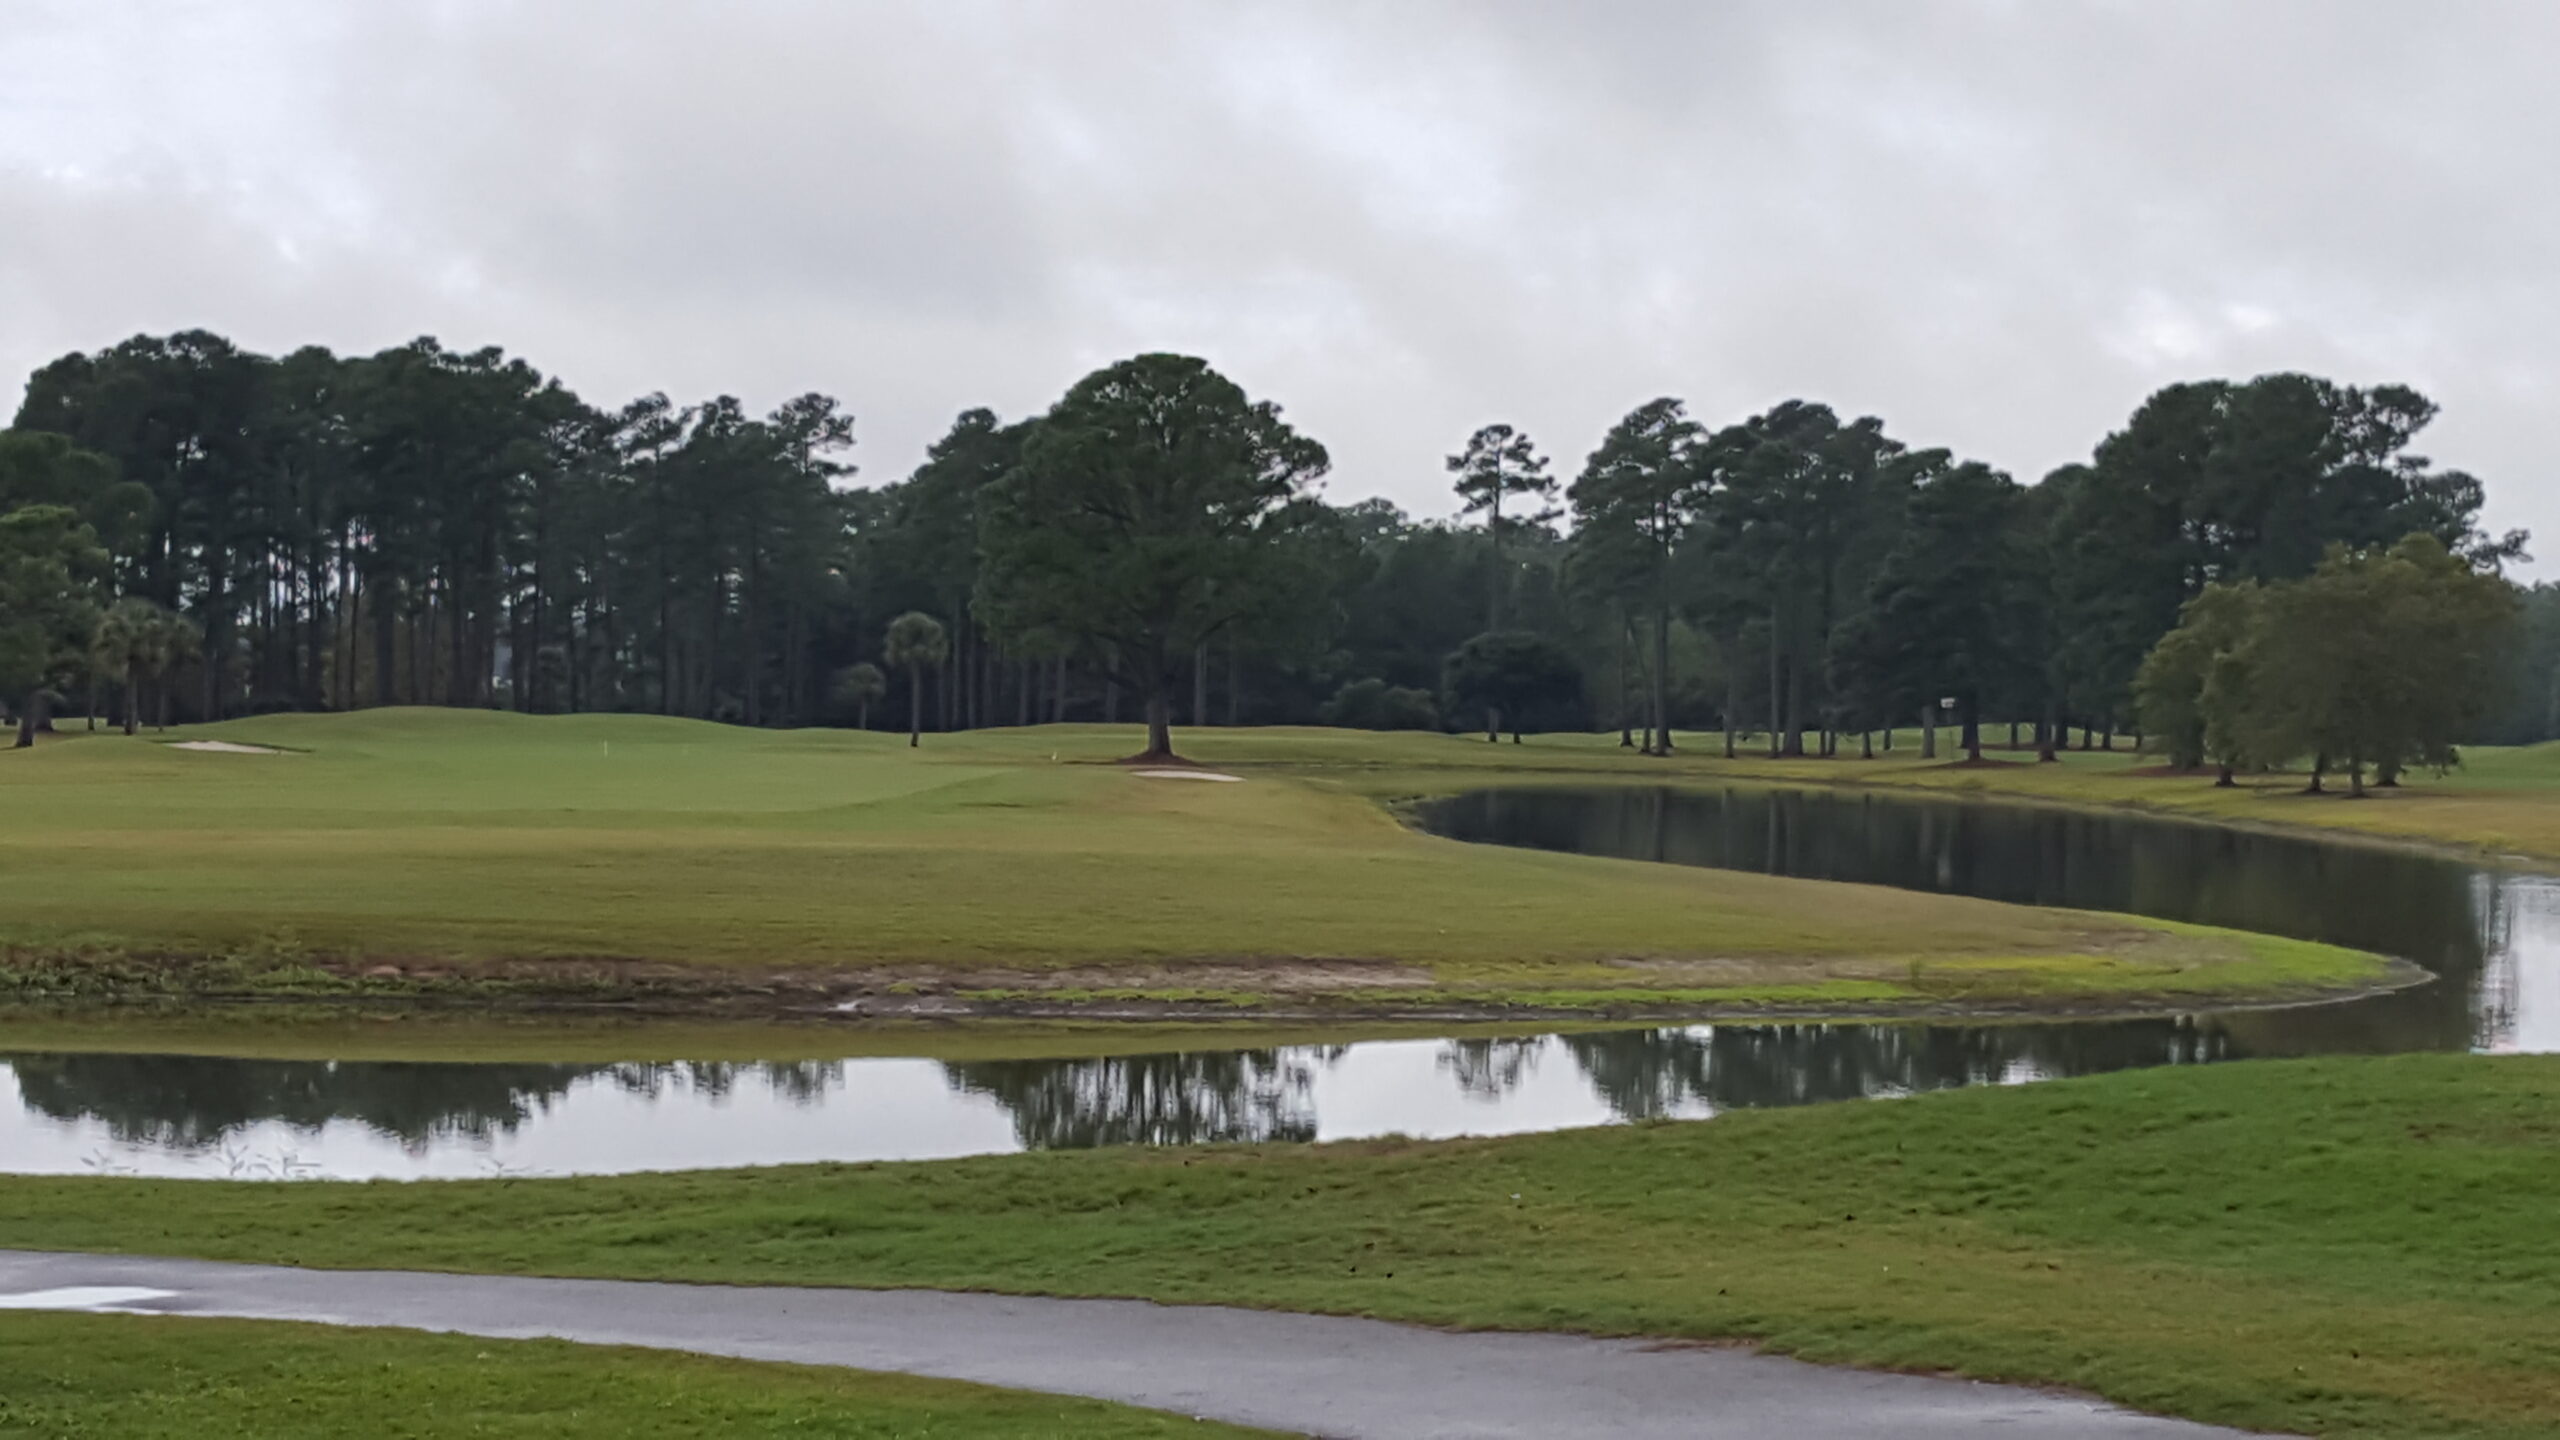 Whispering Pines Golf Course